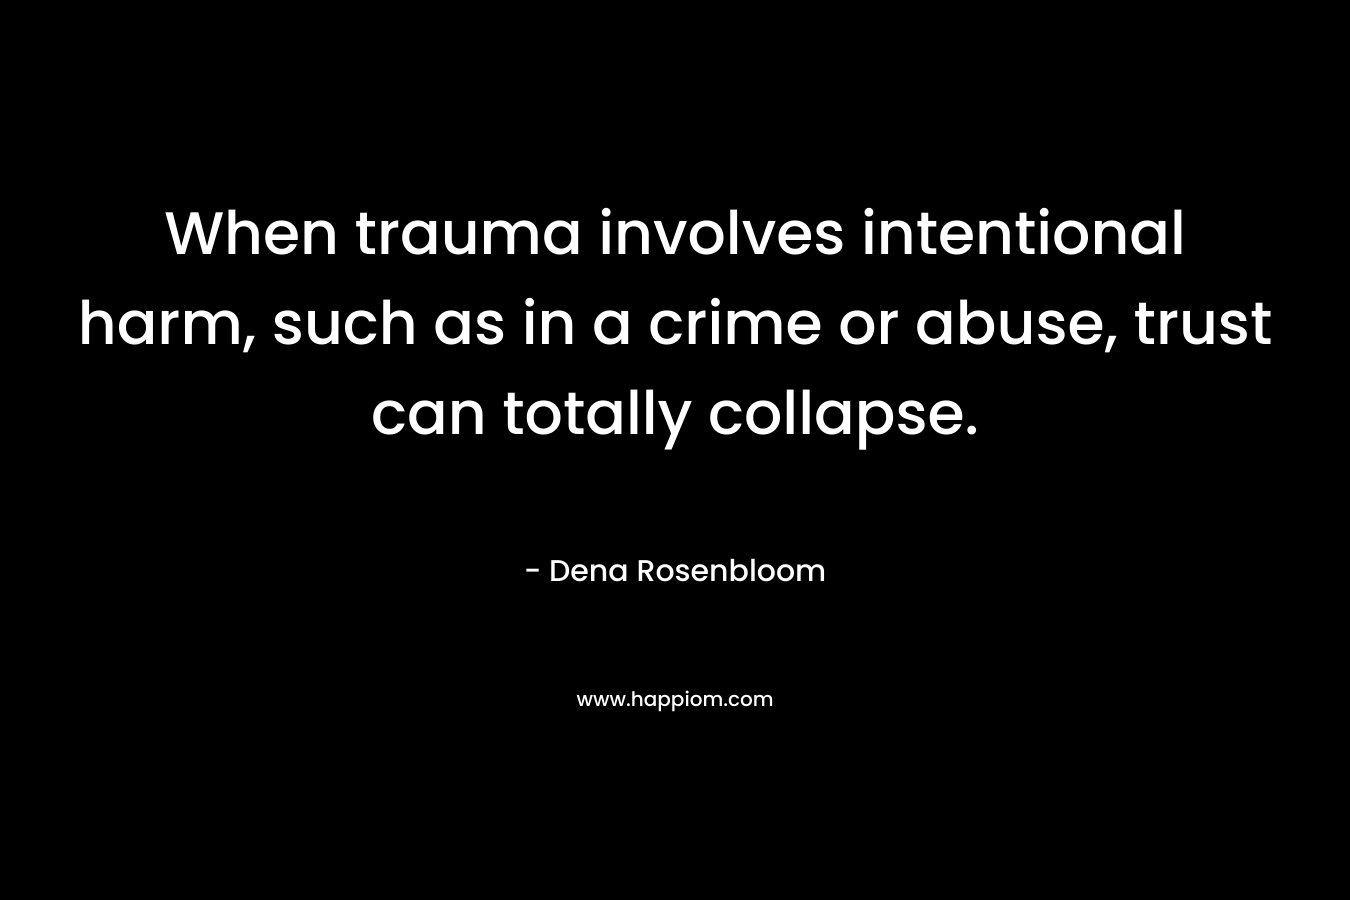 When trauma involves intentional harm, such as in a crime or abuse, trust can totally collapse. – Dena Rosenbloom